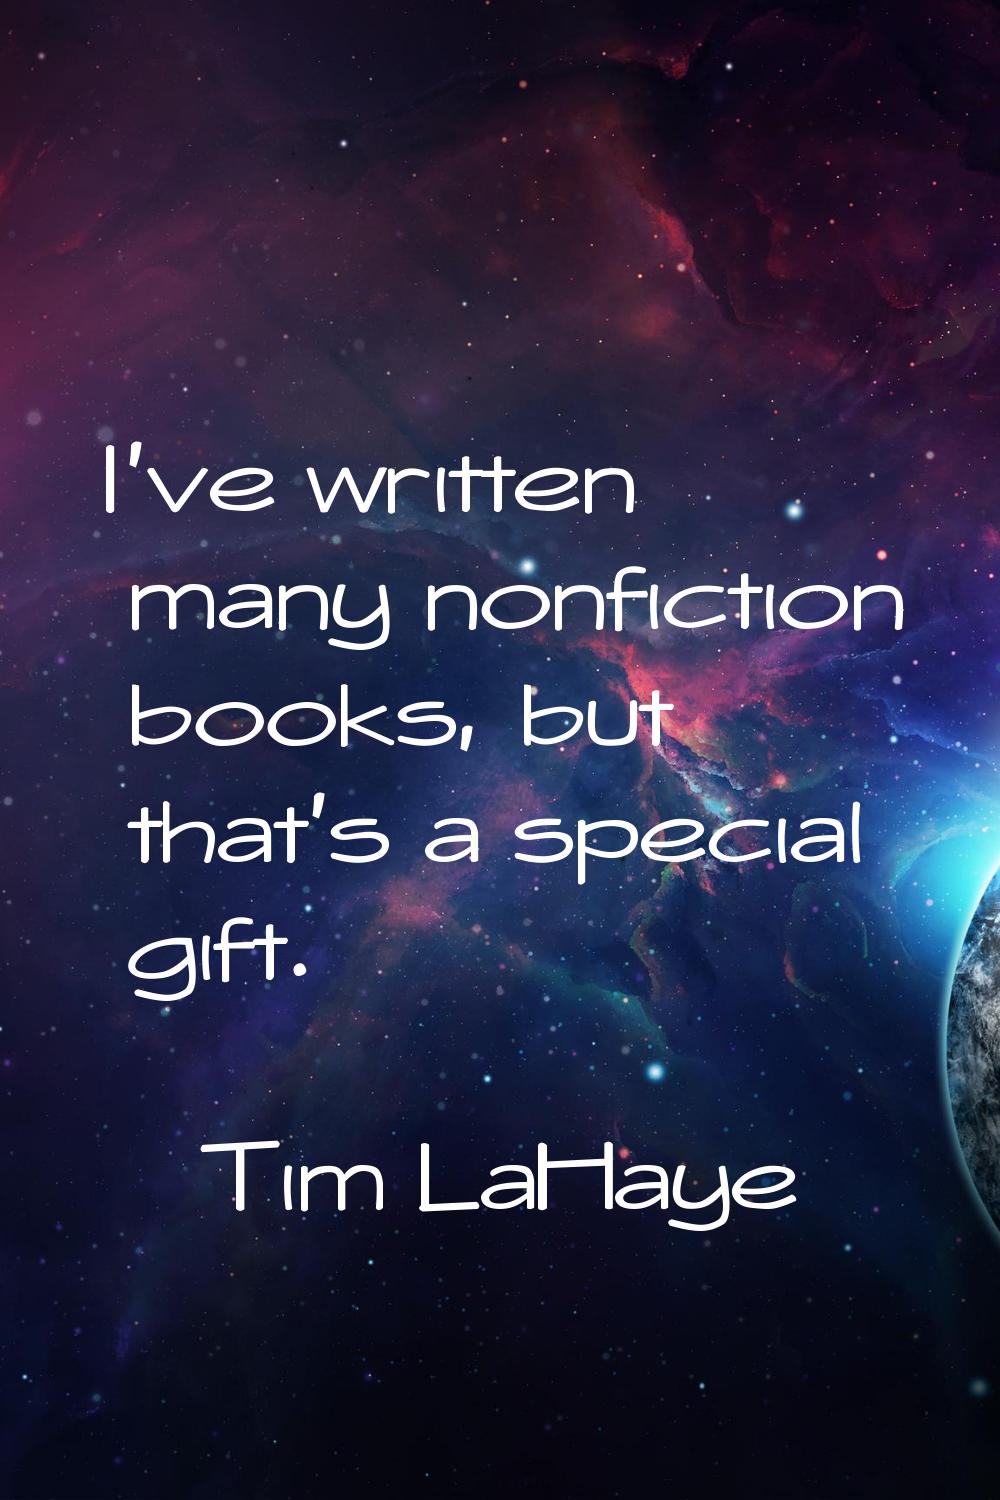 I've written many nonfiction books, but that's a special gift.